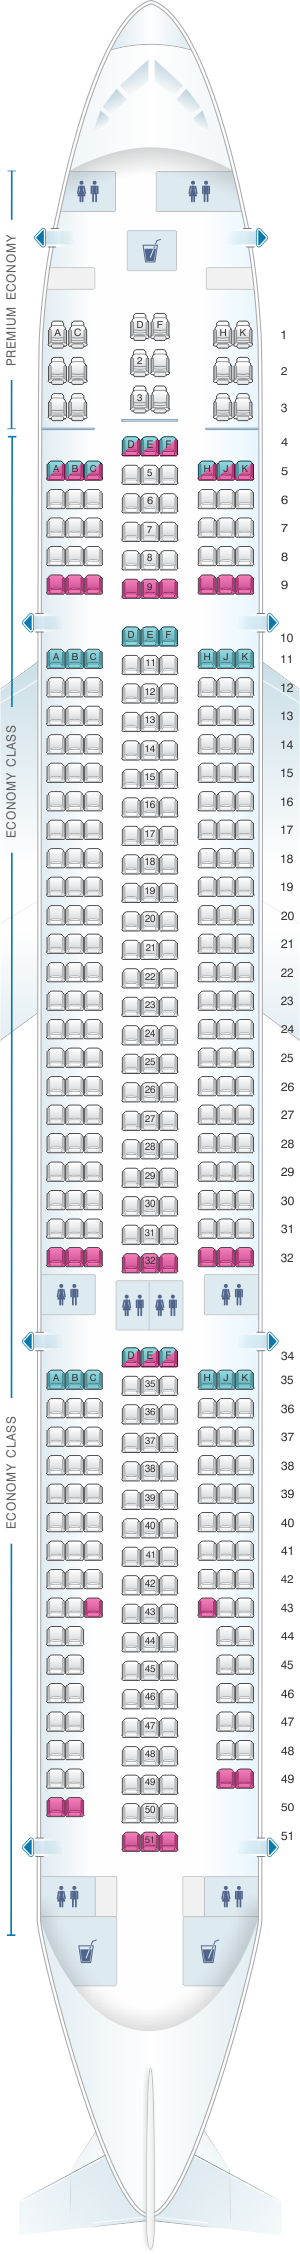 Seat map for Lion Air Airbus A330 300